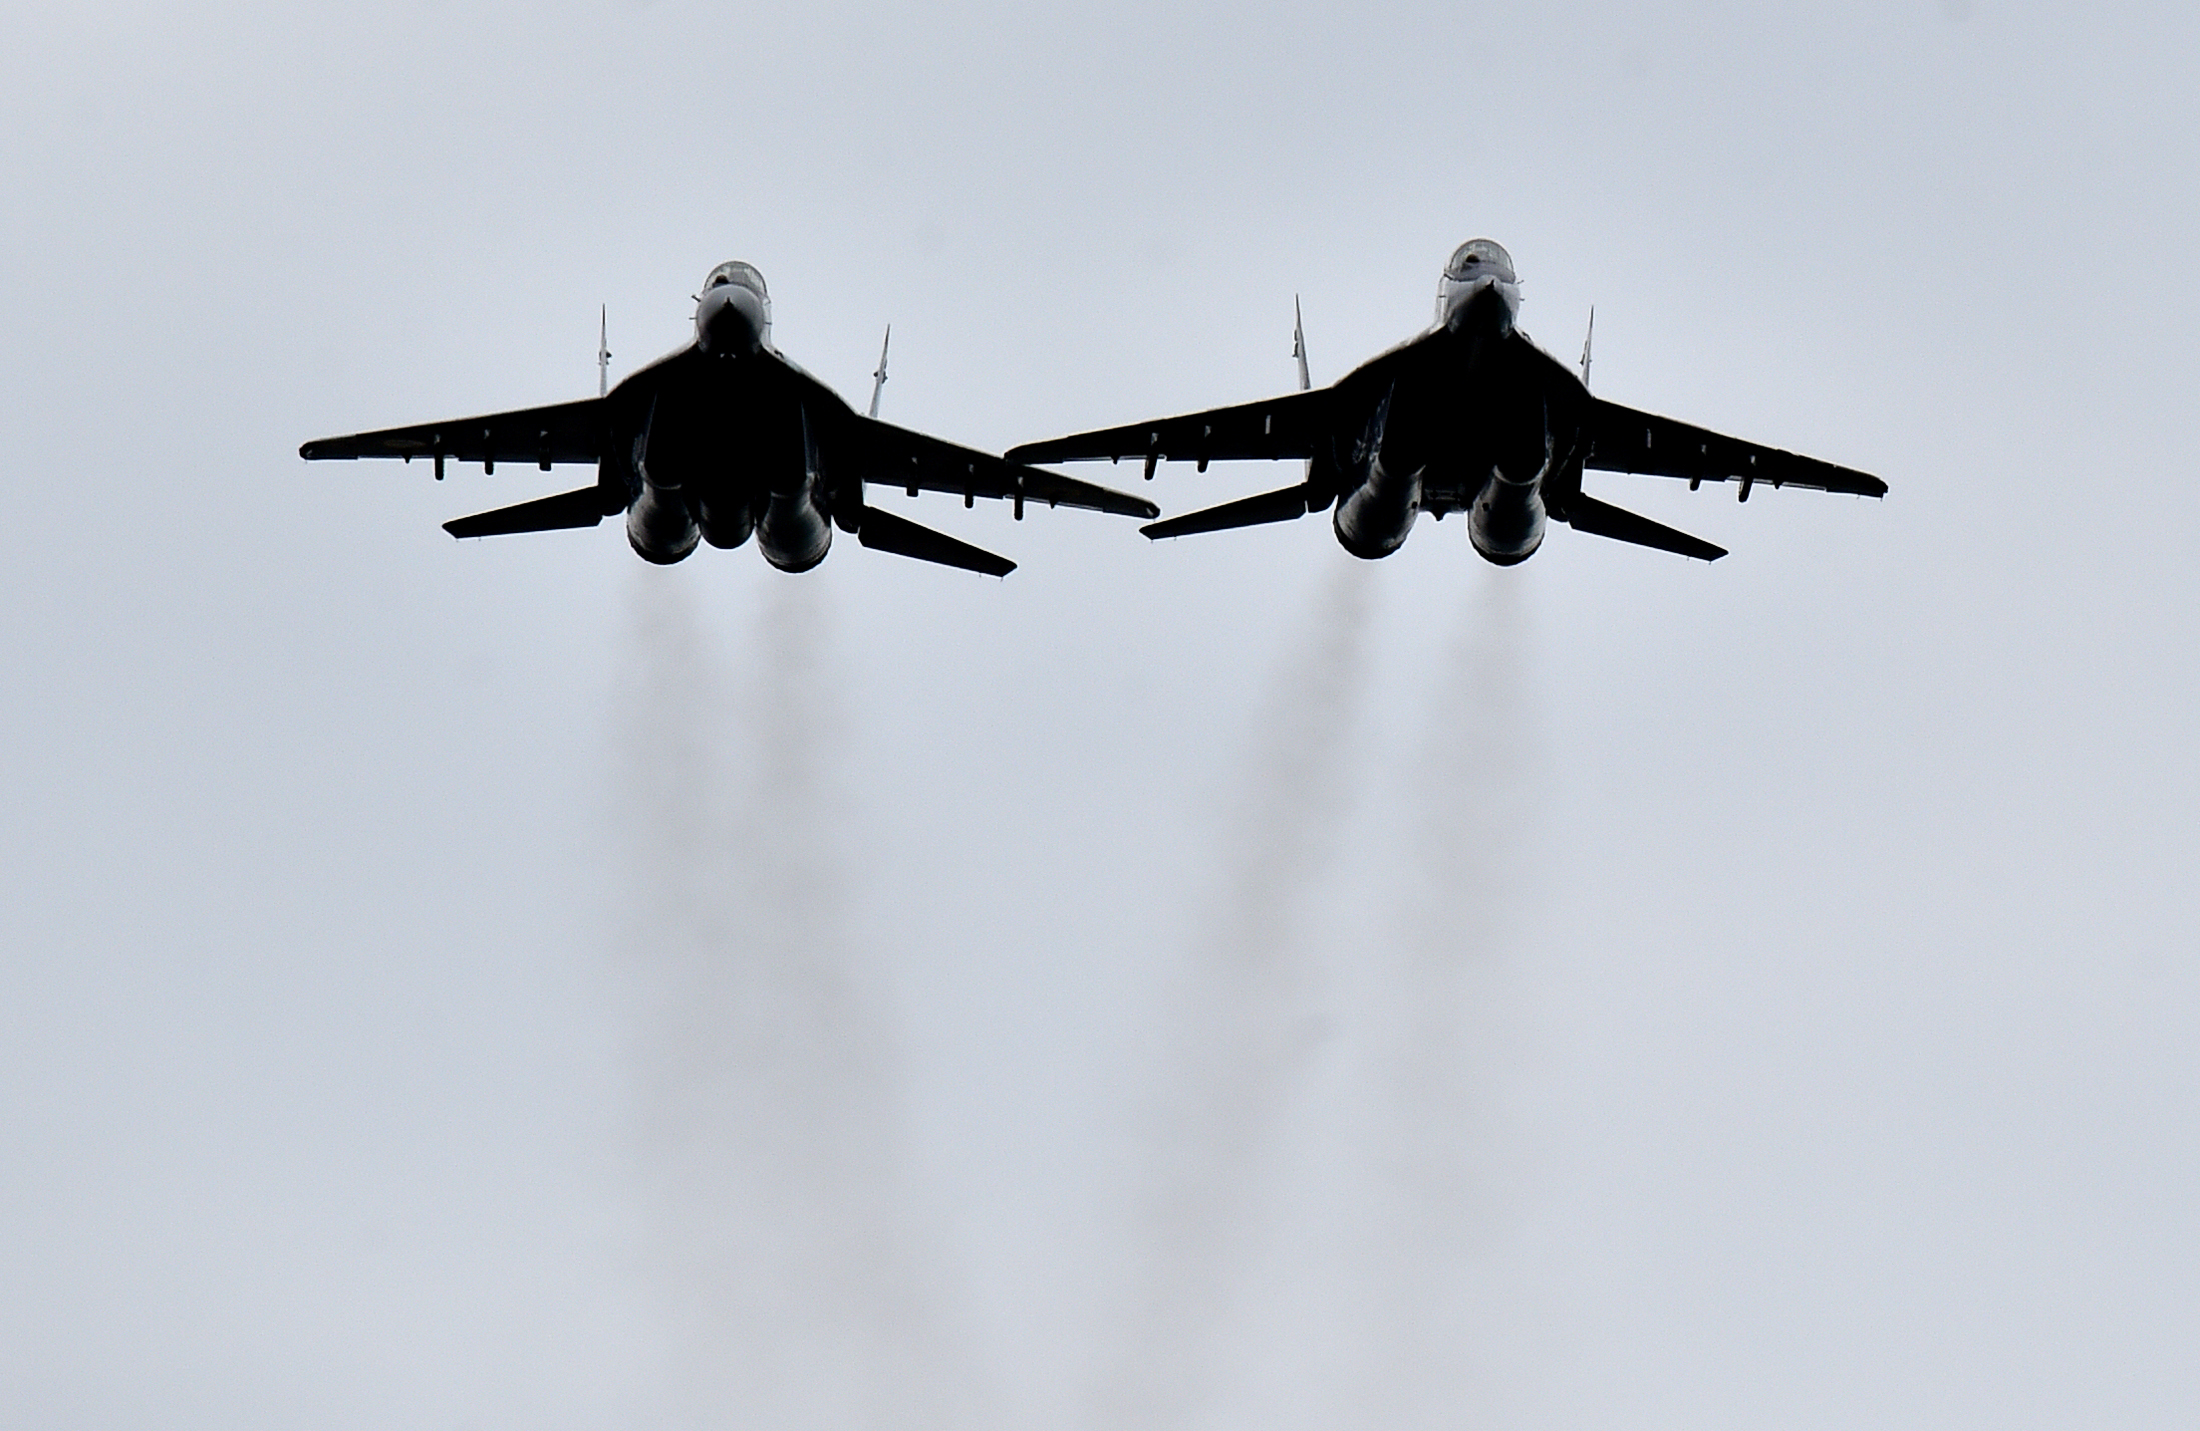 Russian Air Force Shoots Down Ukraine Fighter Jet In Dogfight: Report